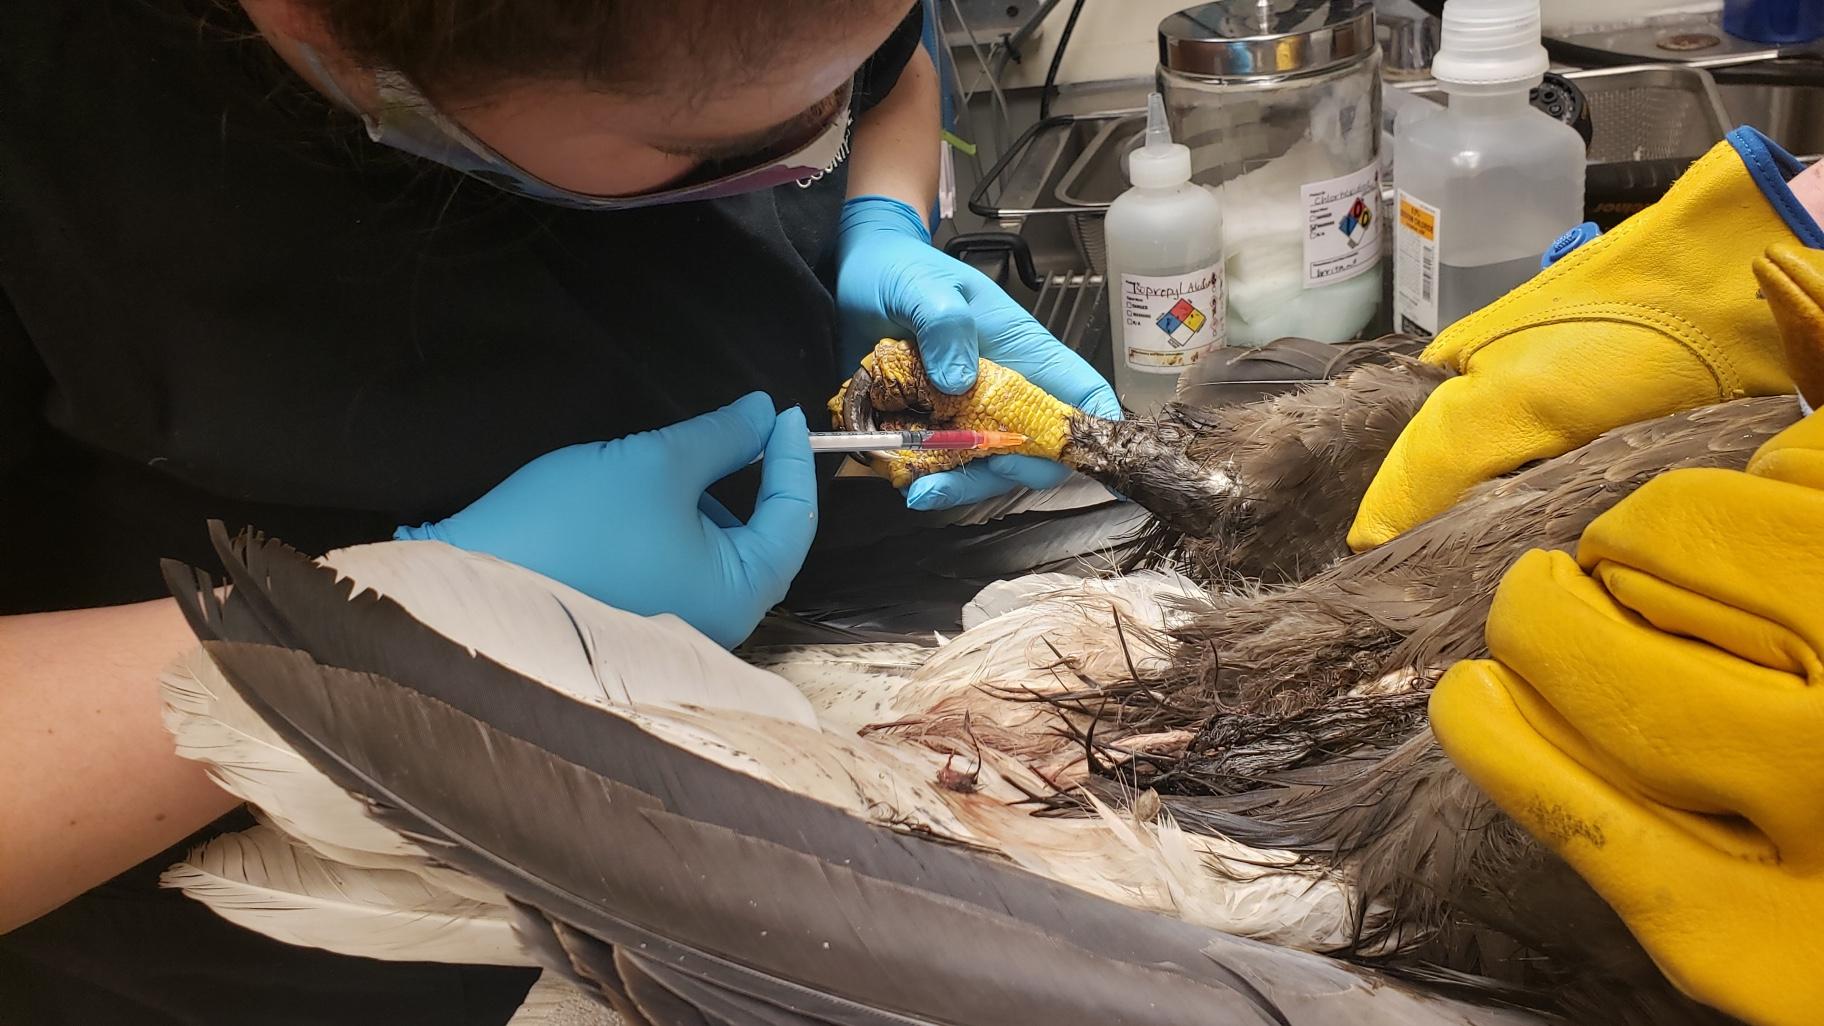 Dr. Sarah Reich treats the injured eagle, which was covered in blood. (Courtesy of Willowbrook Wildlife Center)